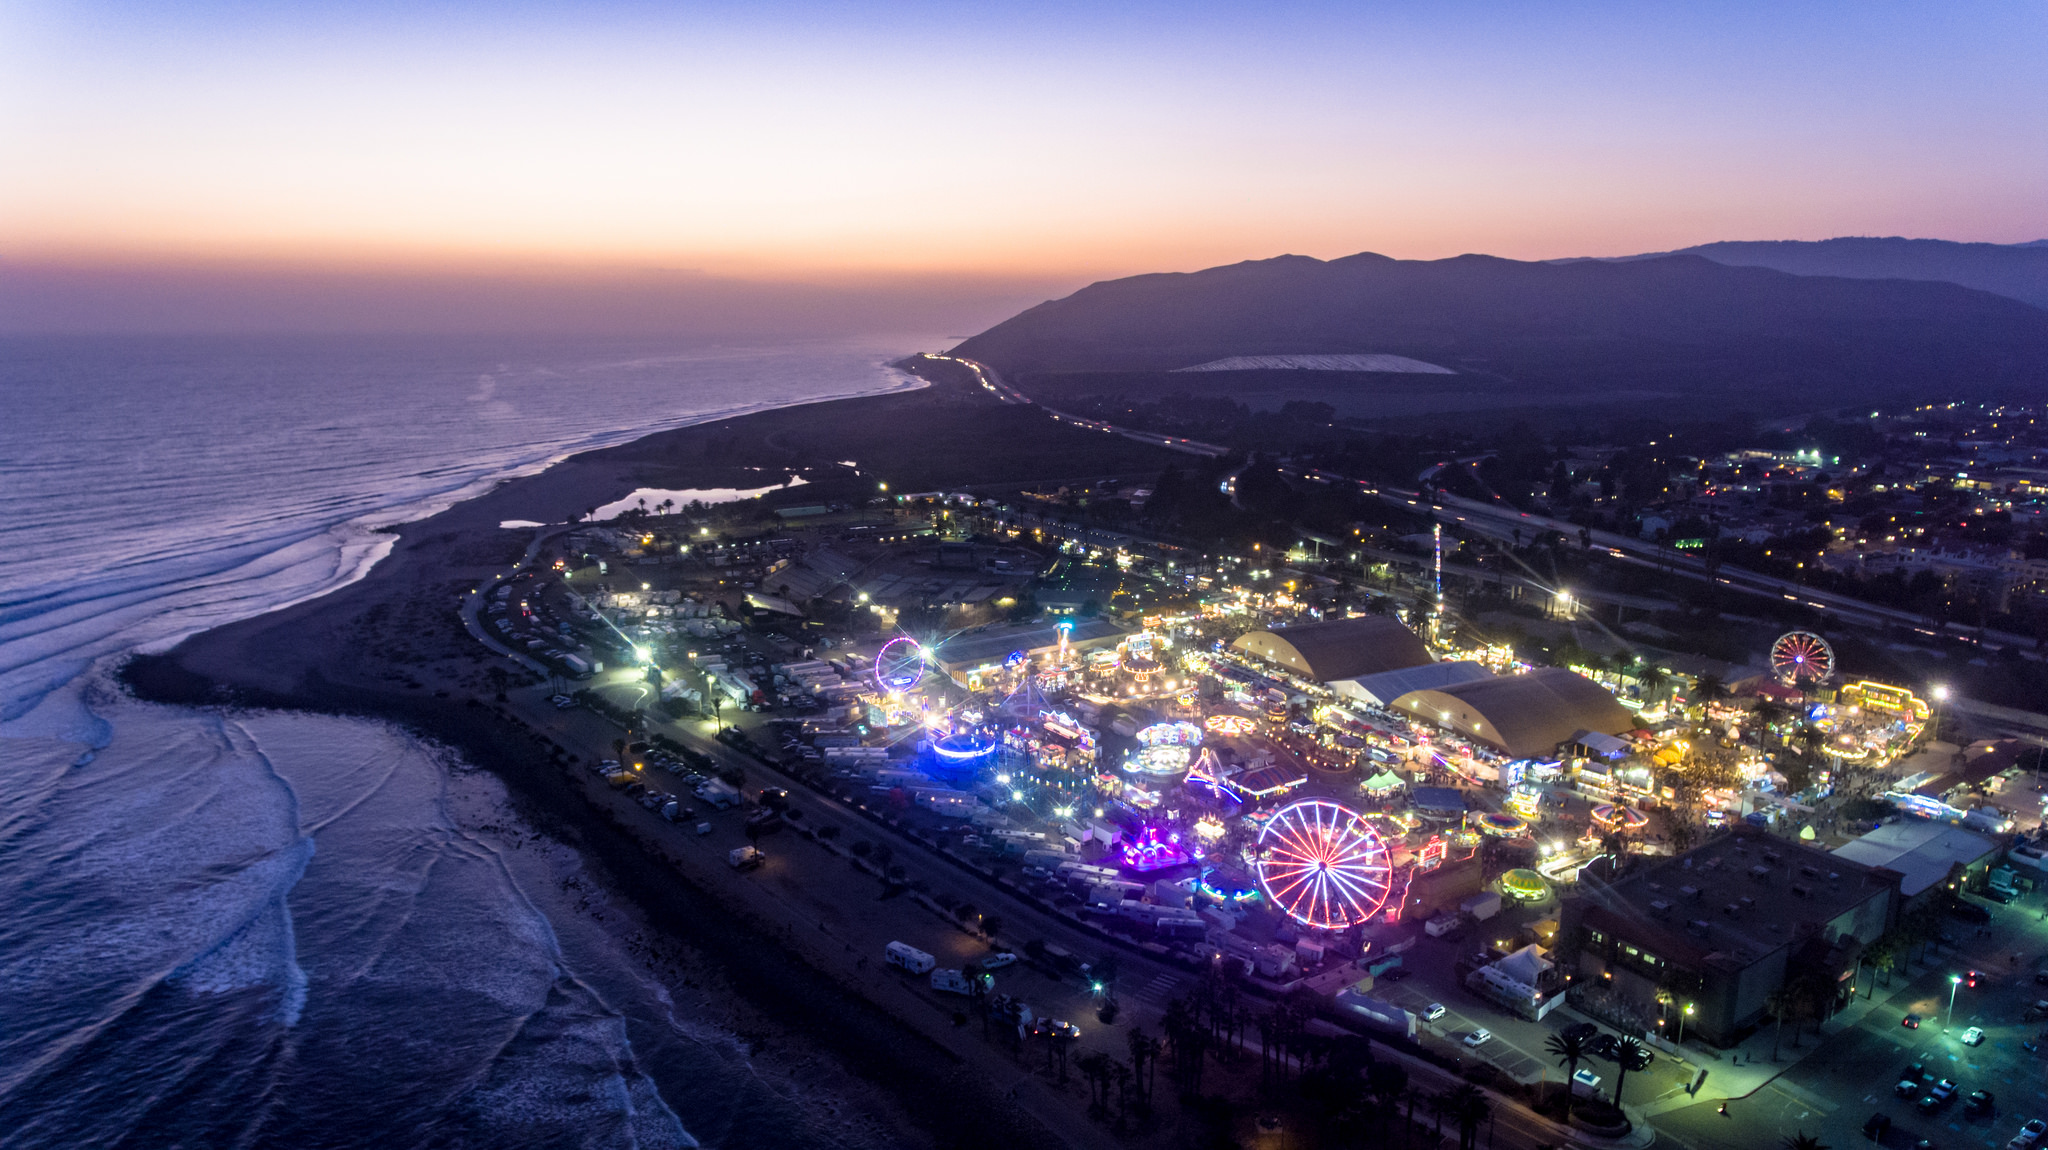 Areal vantage point of the Ventura County fair at dusk, presenting coastline and lit up excitement of the Fair during the early evening.